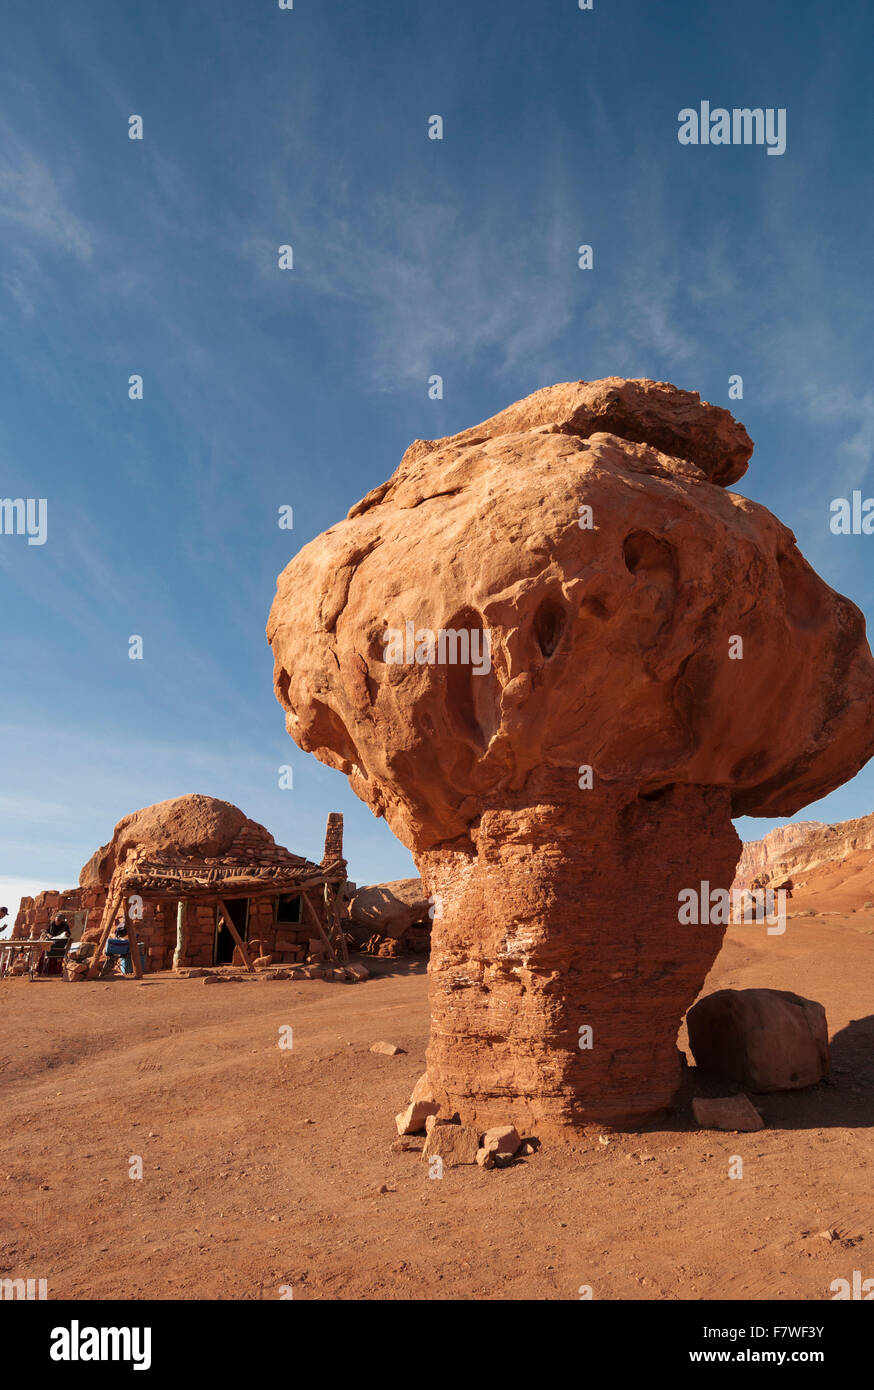 House built in boulder used as Indian arts stand, Marble Canyon, Arizona, United States Stock Photo